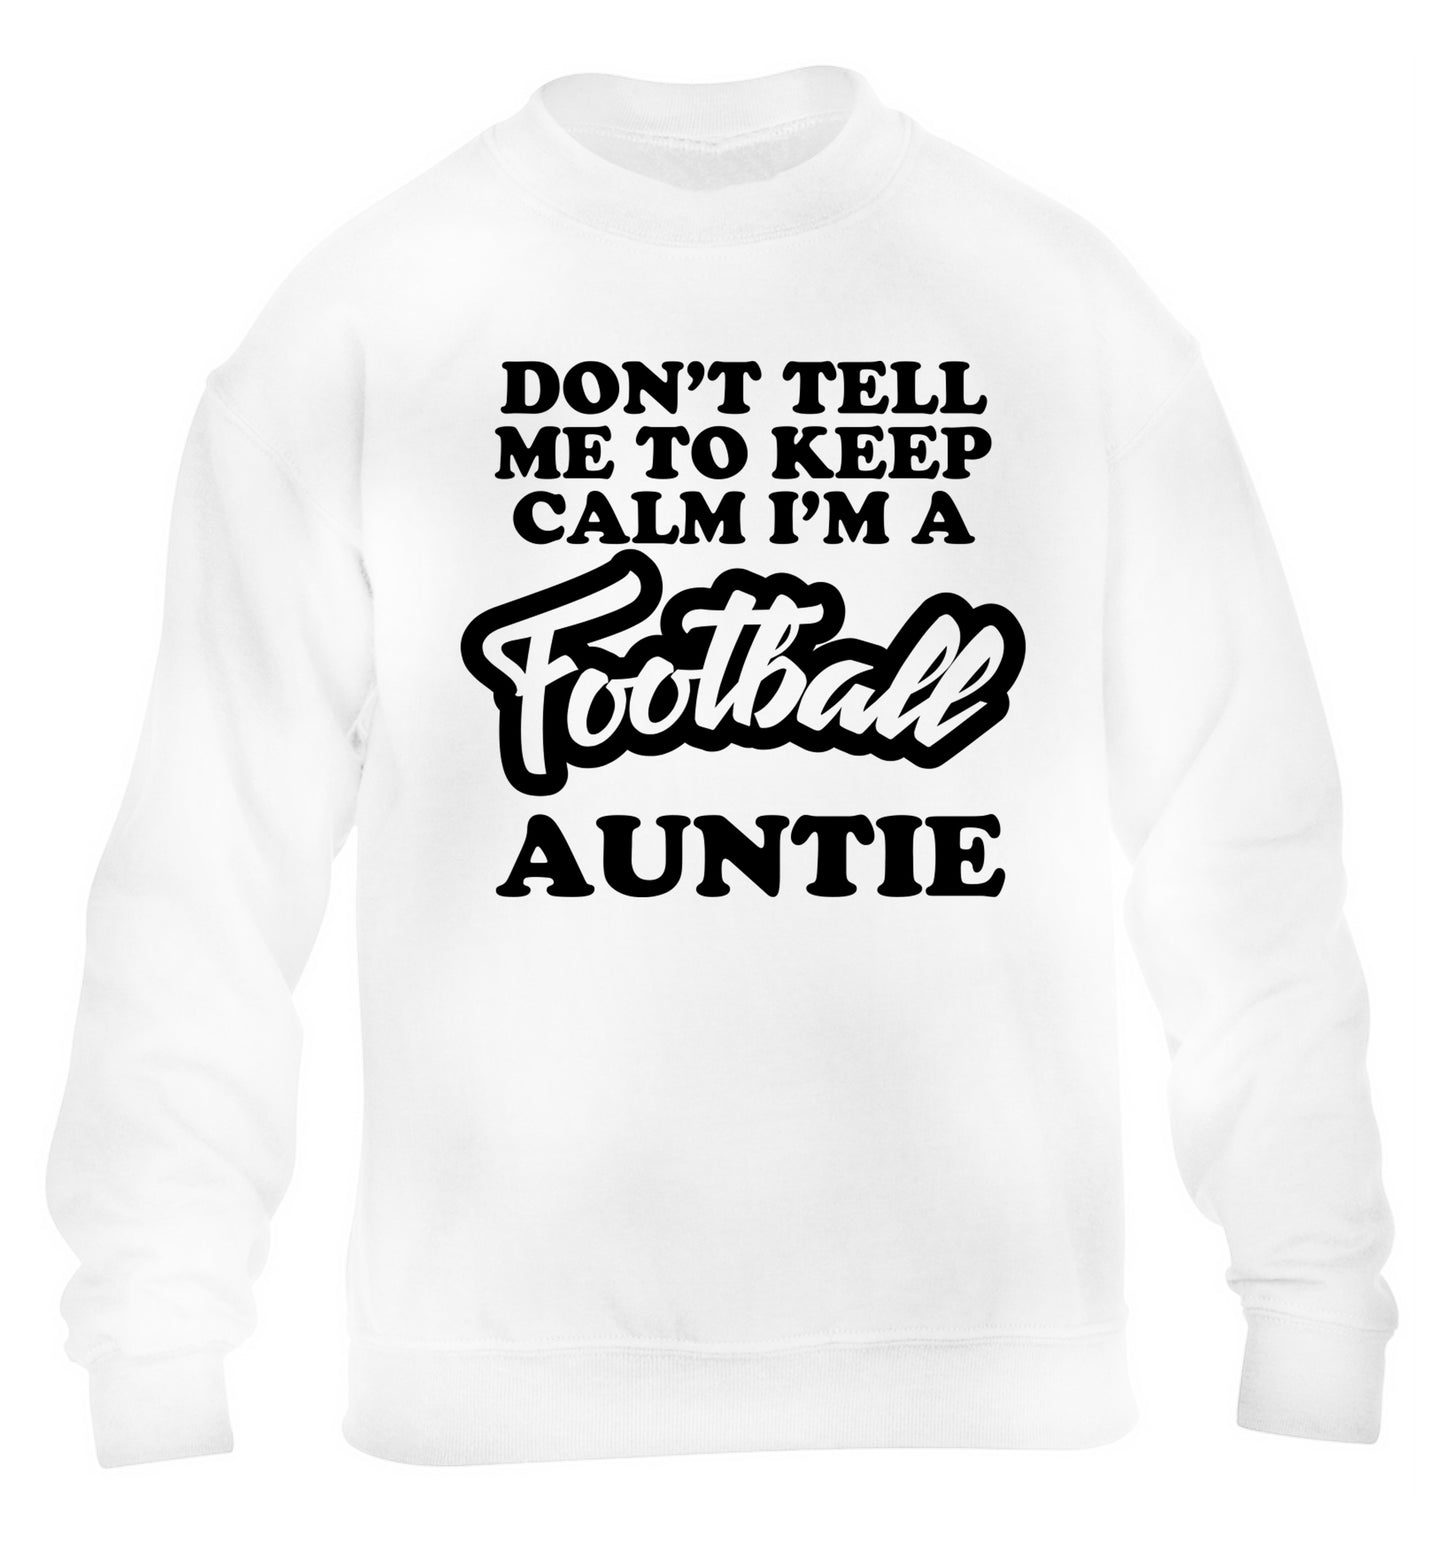 Don't tell me to keep calm I'm a football auntie children's white sweater 12-14 Years